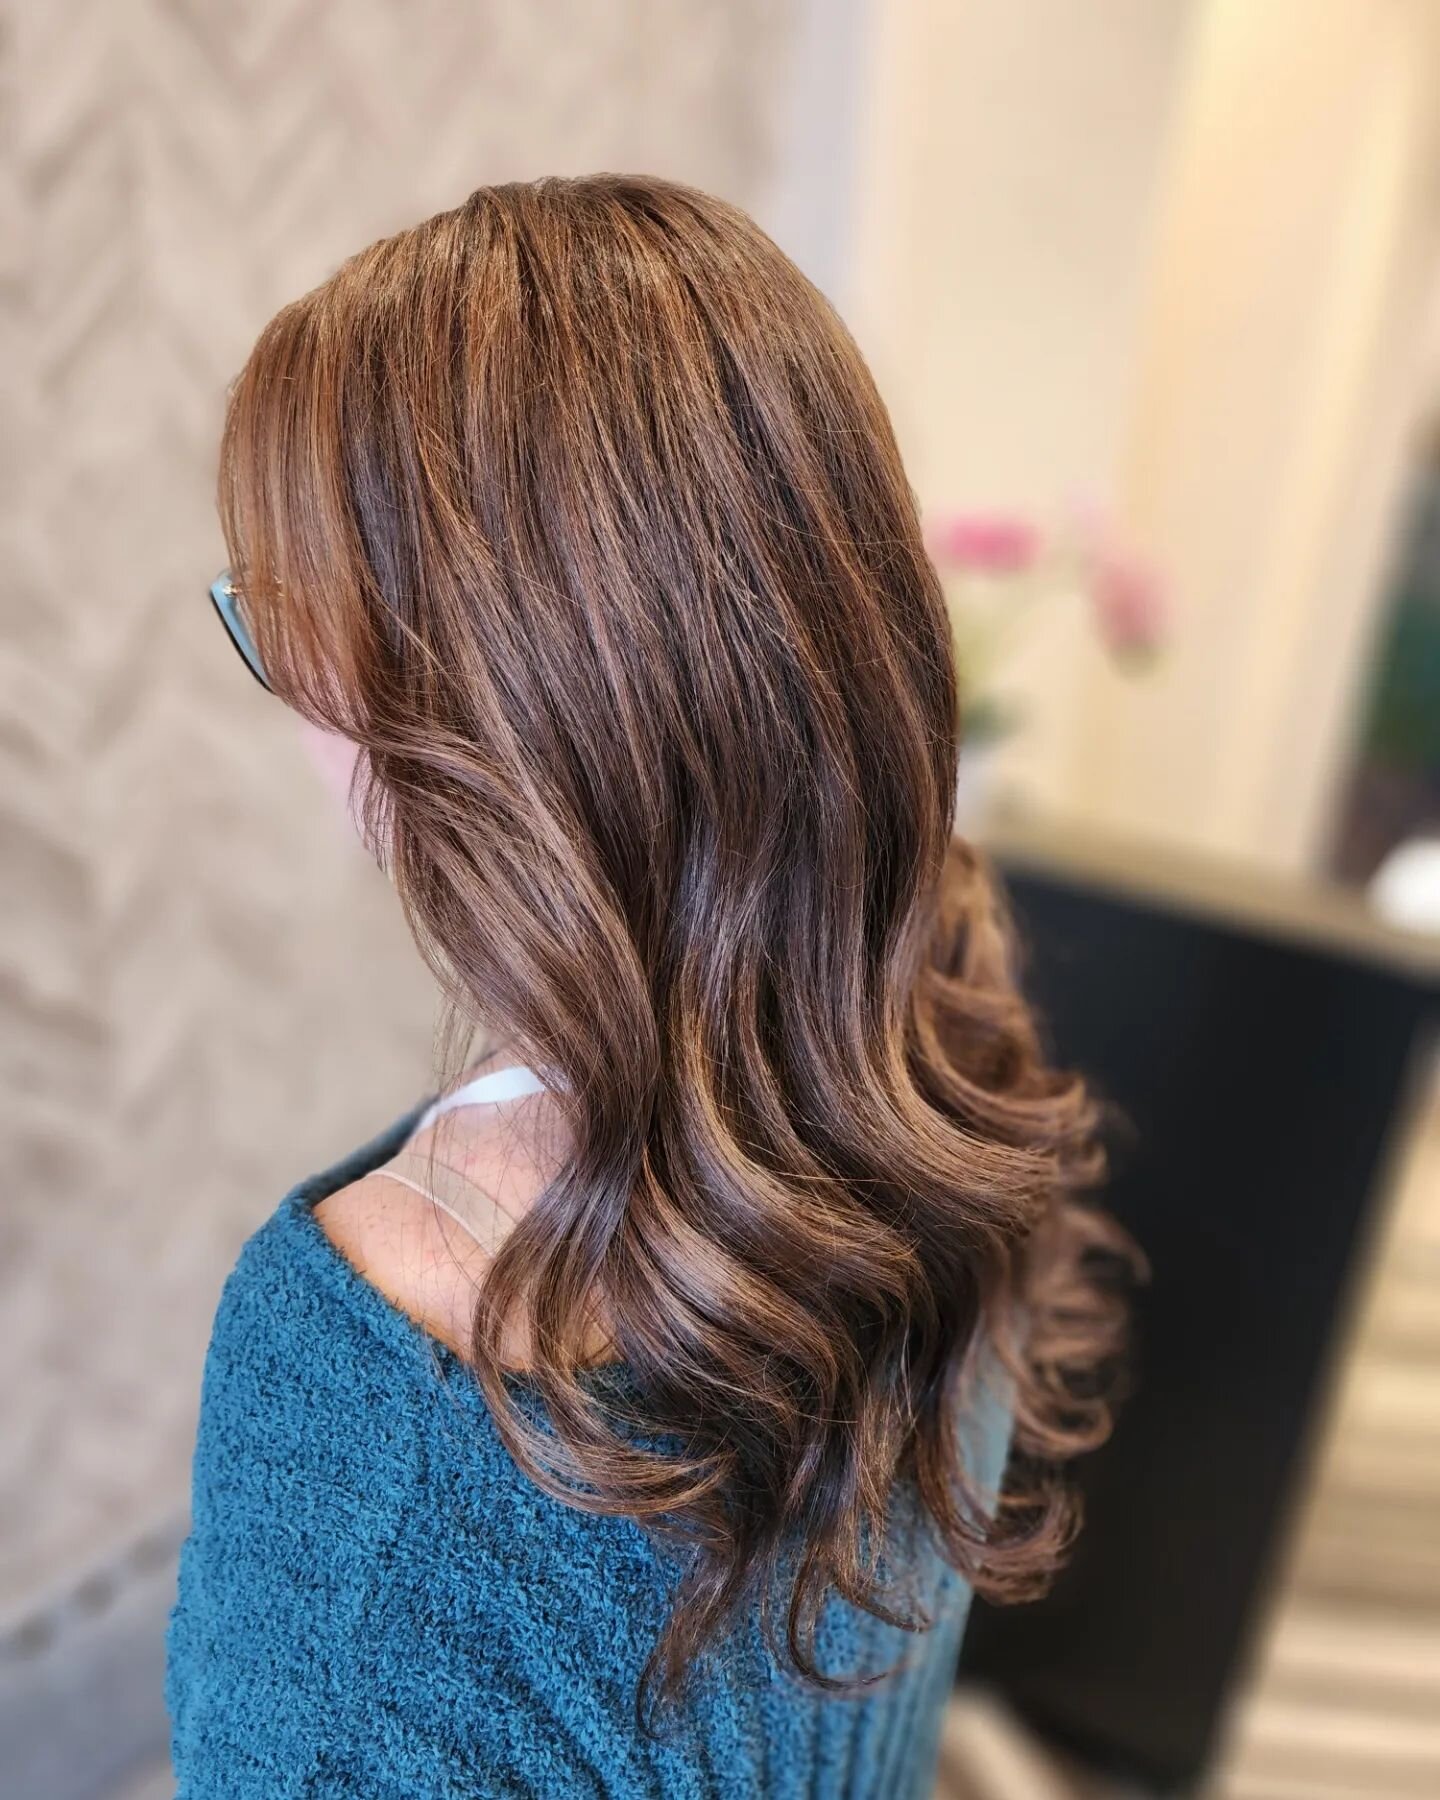 Jessica needed a change so we ditched the old brassy leftover blonde from the summer and gave her a rich chocolate color with dimension and some curtain bangs. 😍😍 @theartistry2020nj @phenixsalonsuiteswoodbridgenj